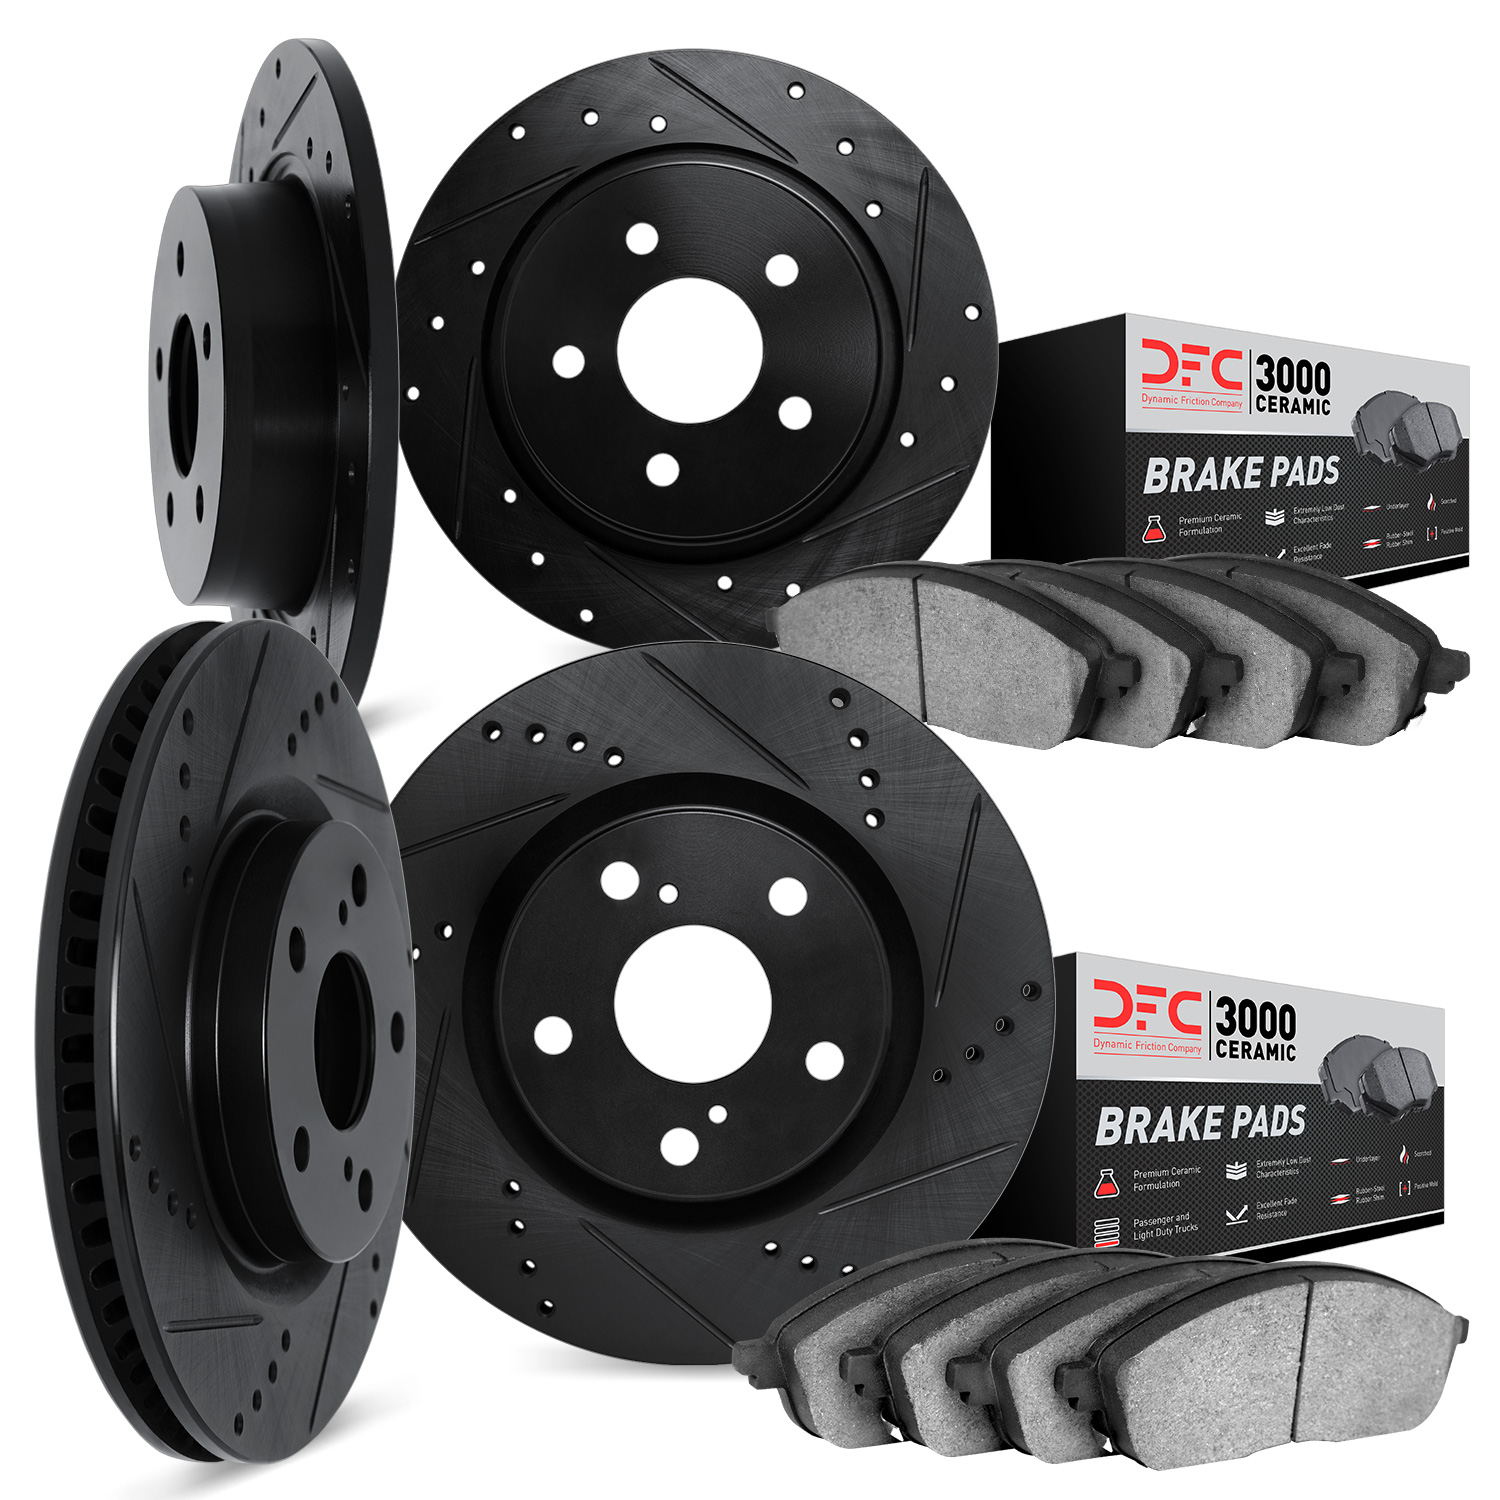 8304-54073 Drilled/Slotted Brake Rotors with 3000-Series Ceramic Brake Pads Kit [Black], 2004-2013 Volvo, Position: Front and Re